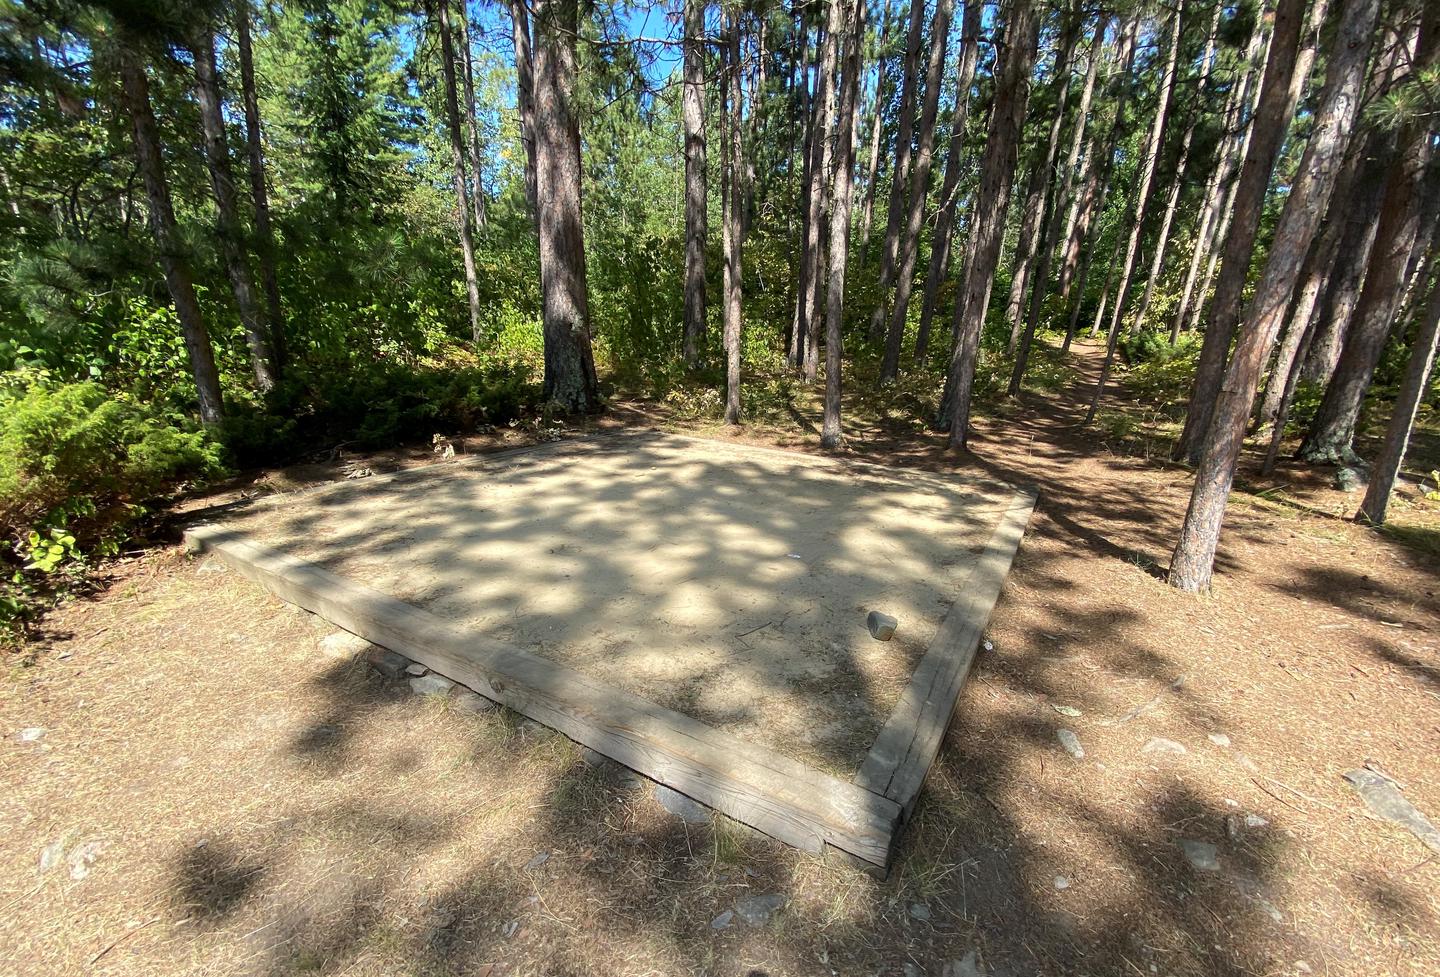 R92 - Blueberry Island West, tent pad #3 at campsite.Tent pad #3